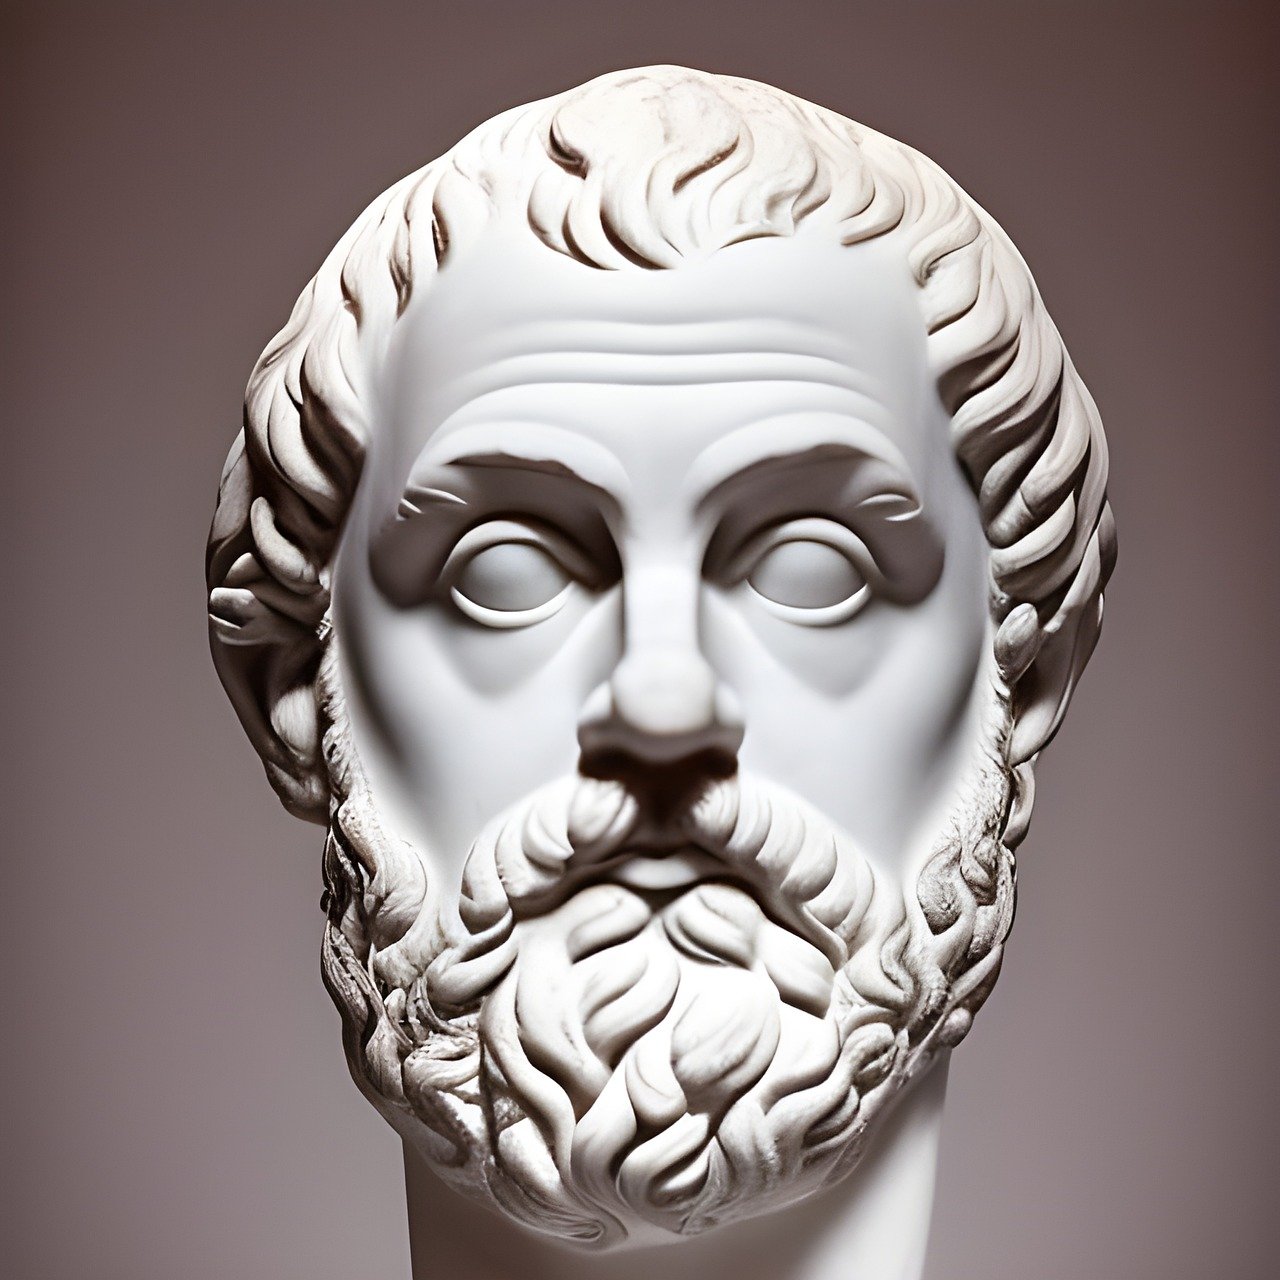 A stone carving of Plato